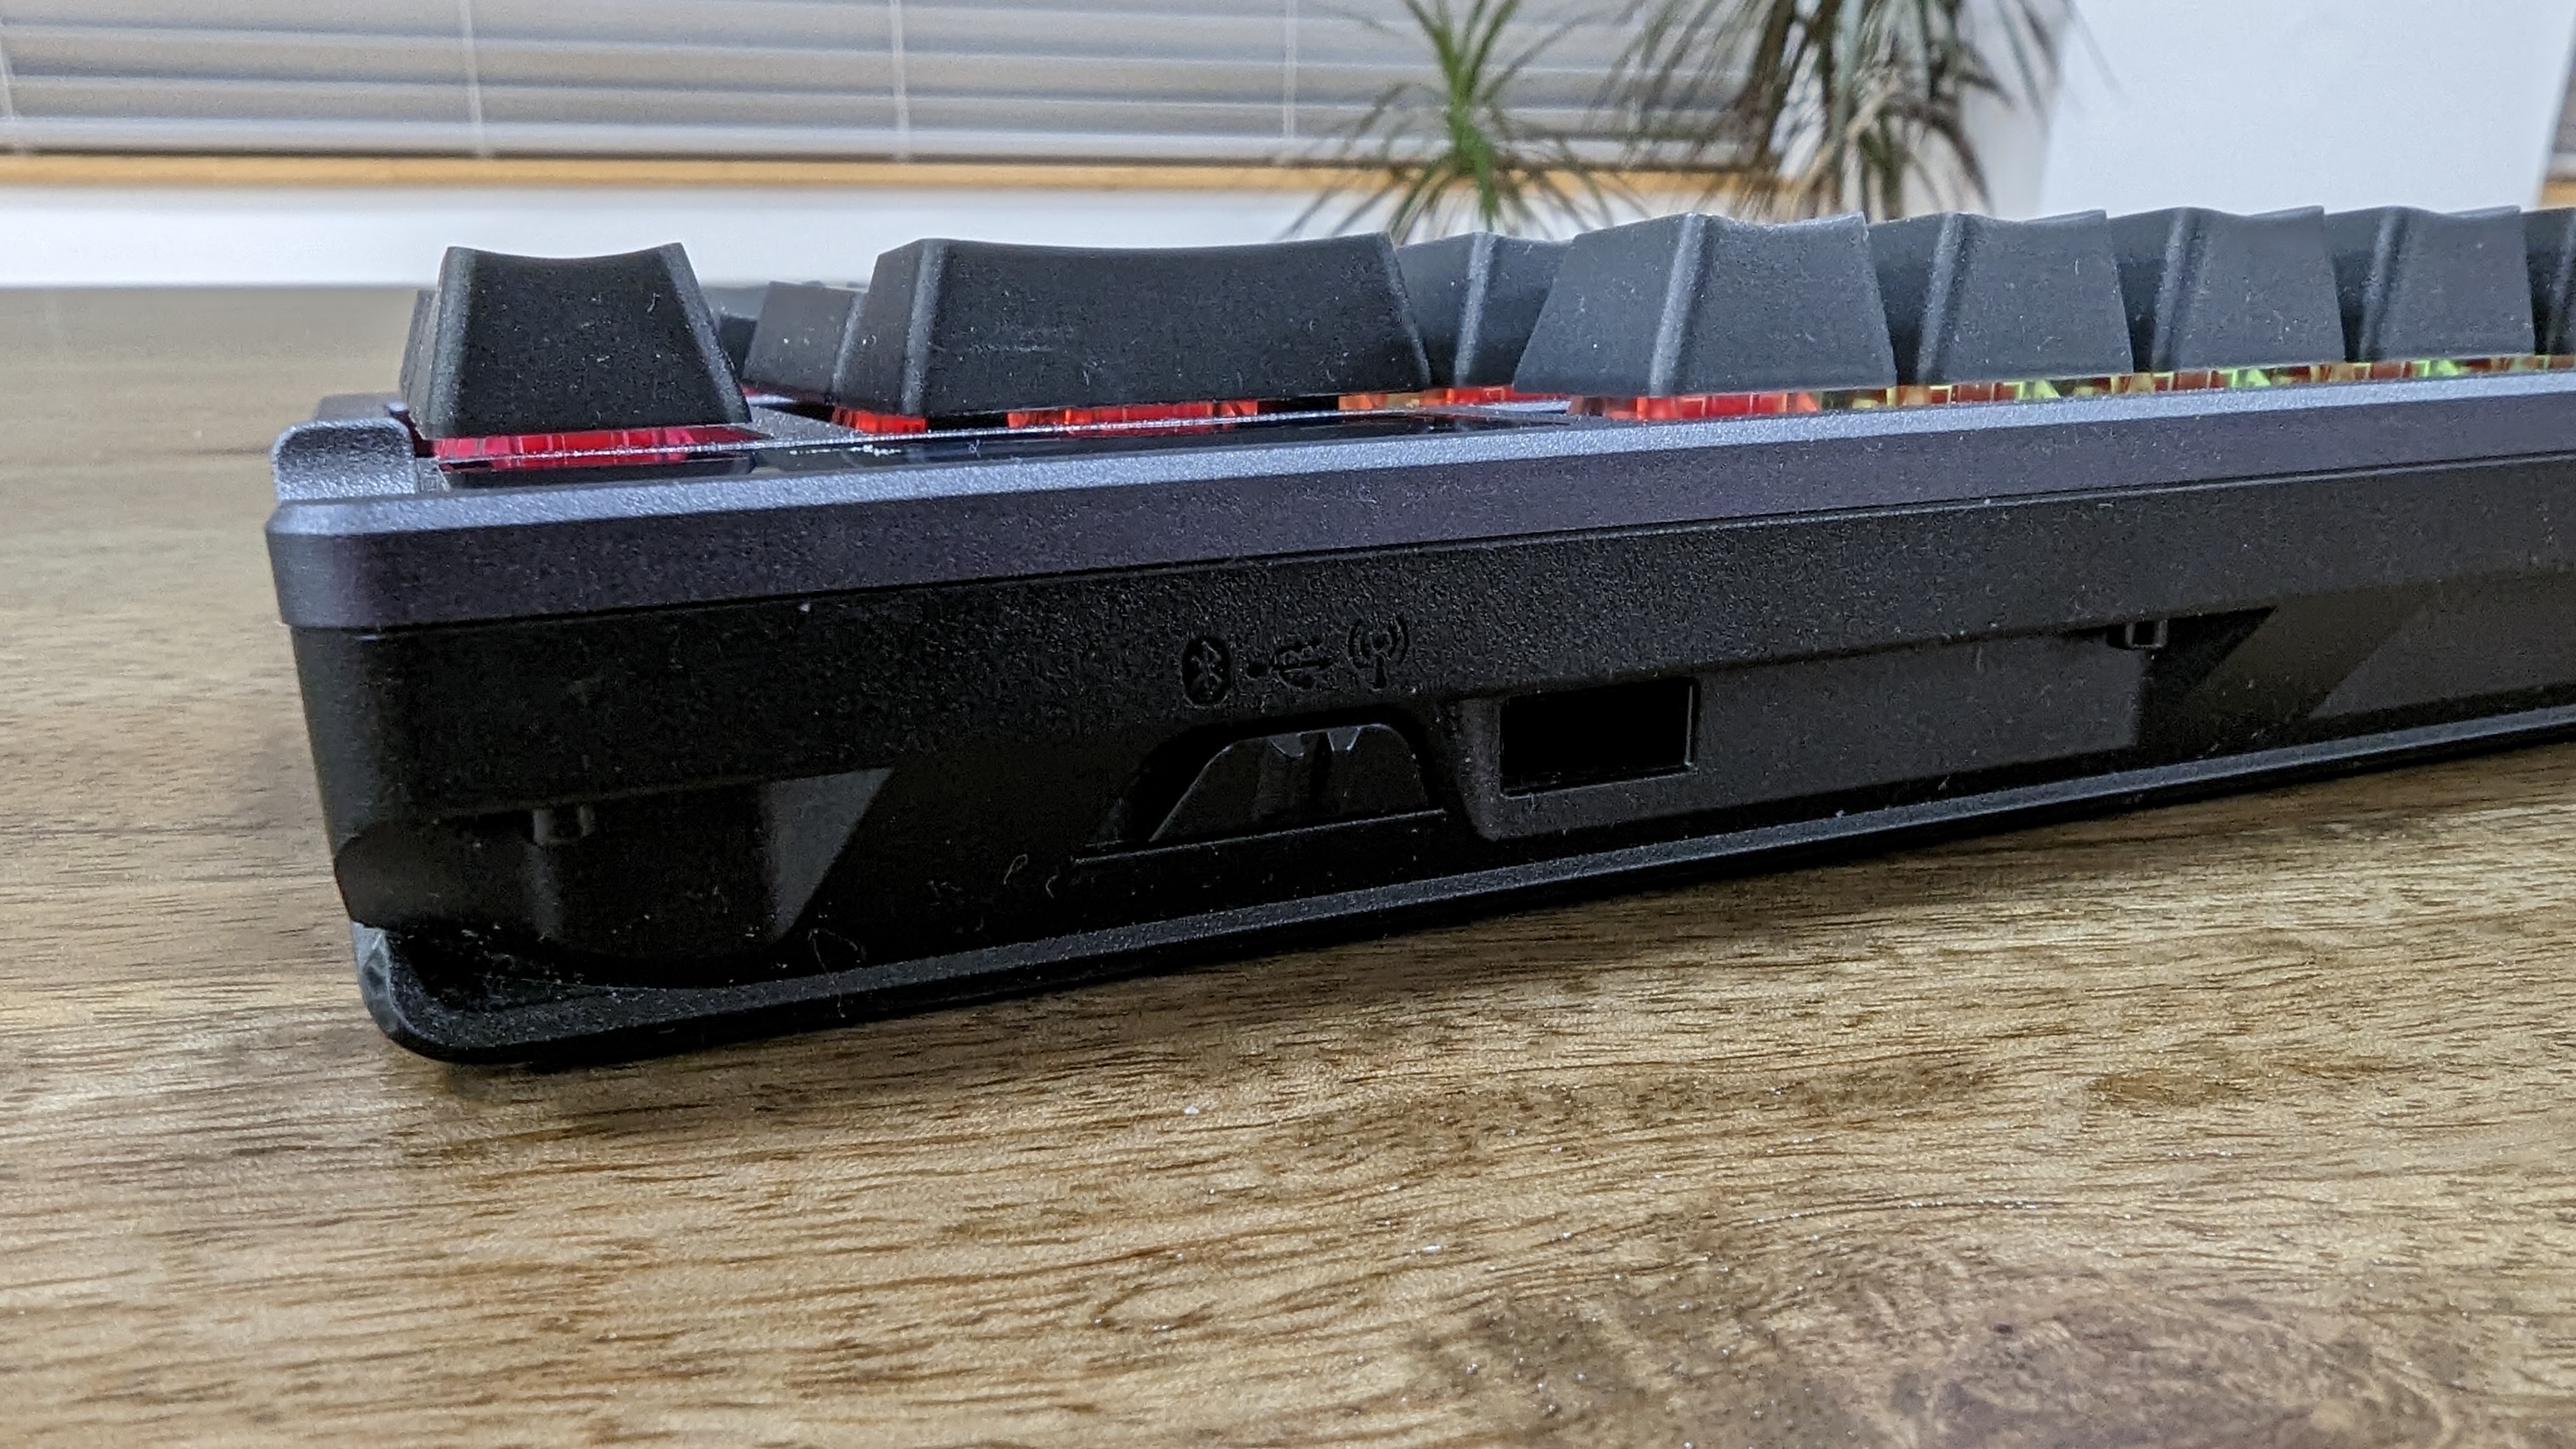 Asus ROG Azoth wireless gaming keyboard with RGB lighting on a wooden desk